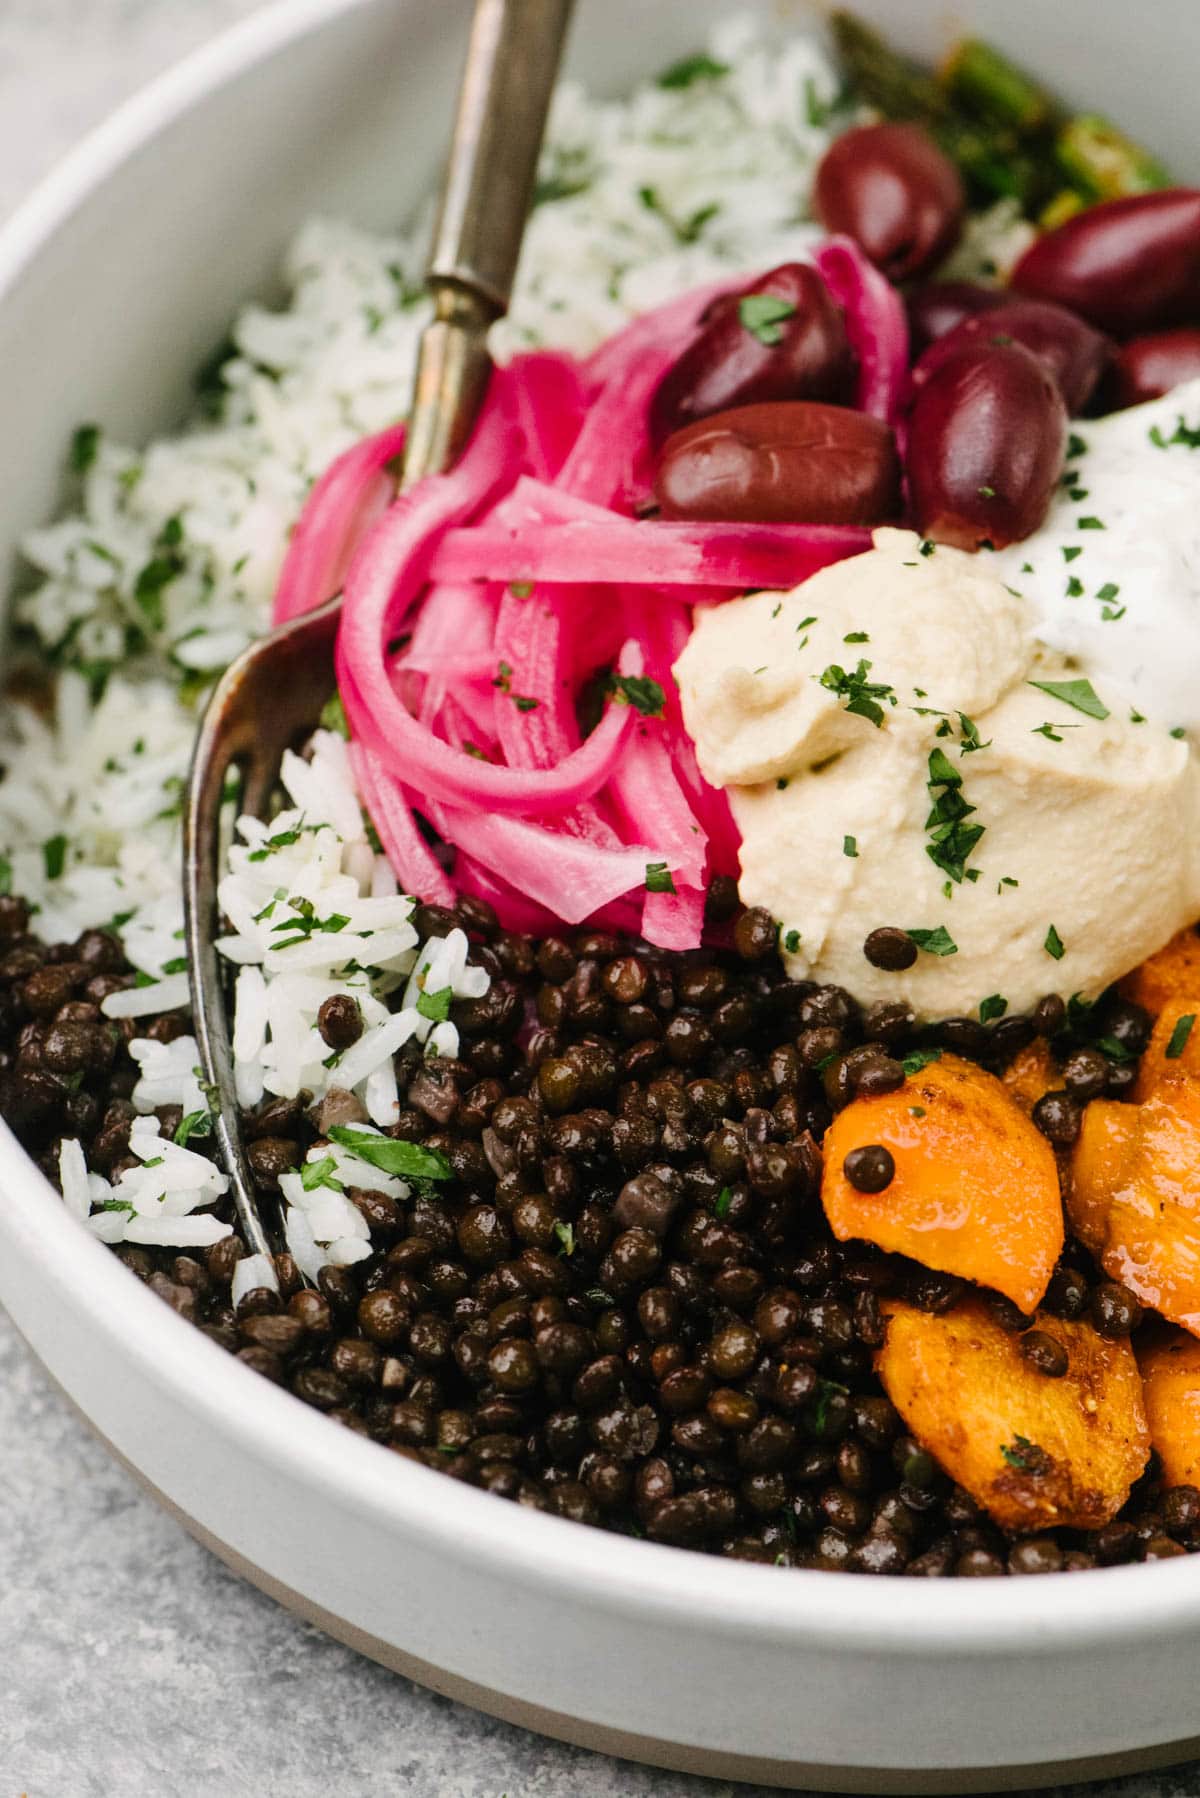 Side view, a fork tucked into a CAVA style black lentil bowl made with herbed white rice, black lentils, and roasted carrots and asparagus topped with hummus, olives, and pickled red onions.